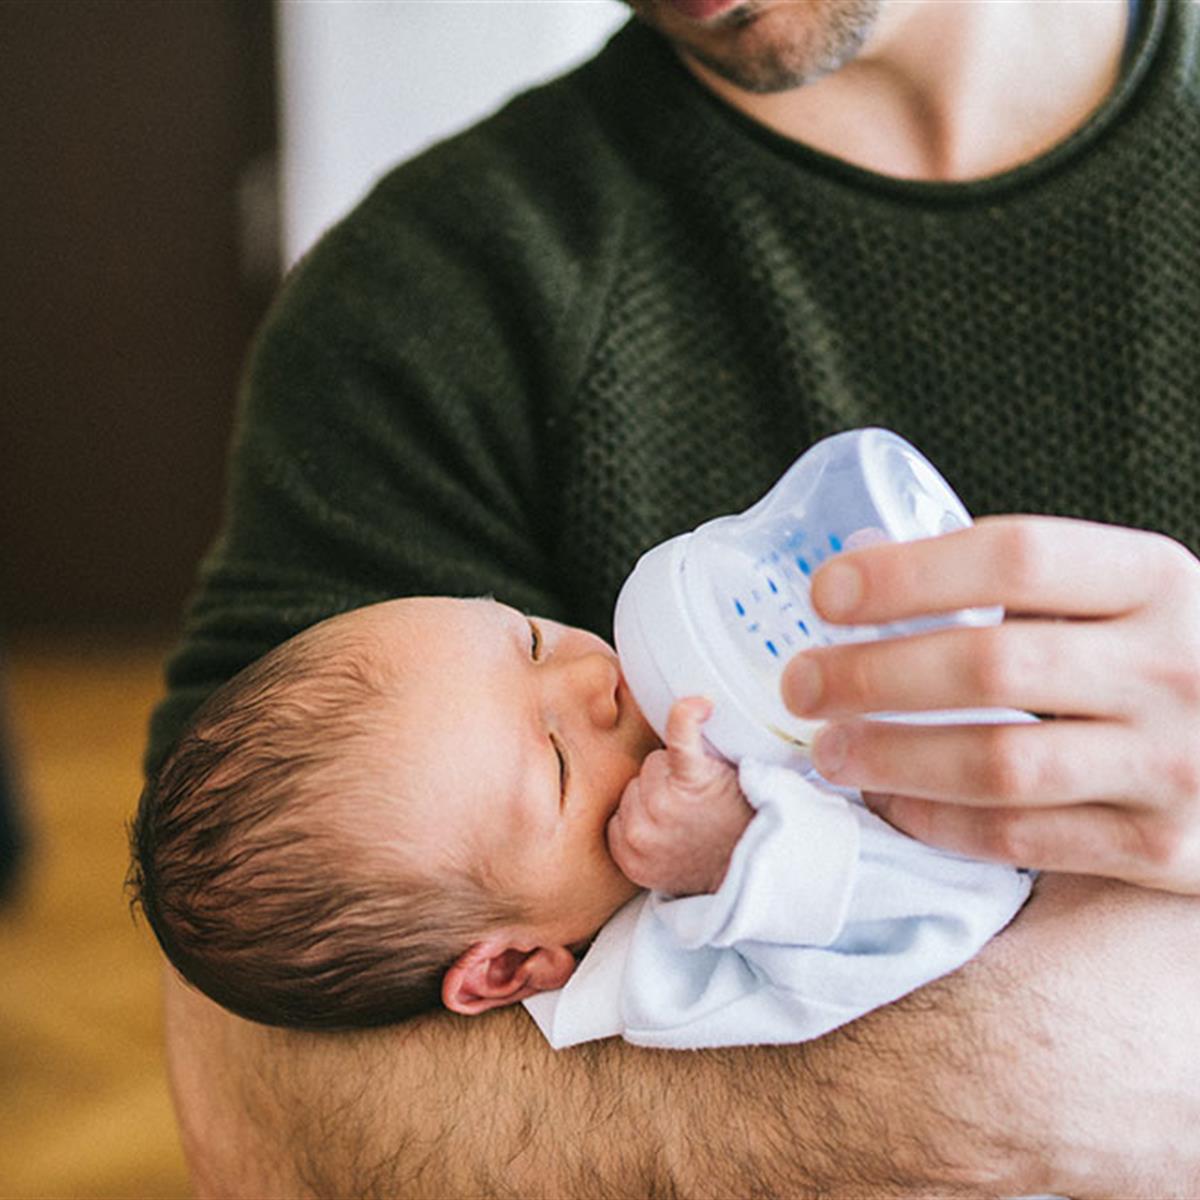 How to Bottle-Feed a Baby: Tips for Bottle-Feeding Your Newborn